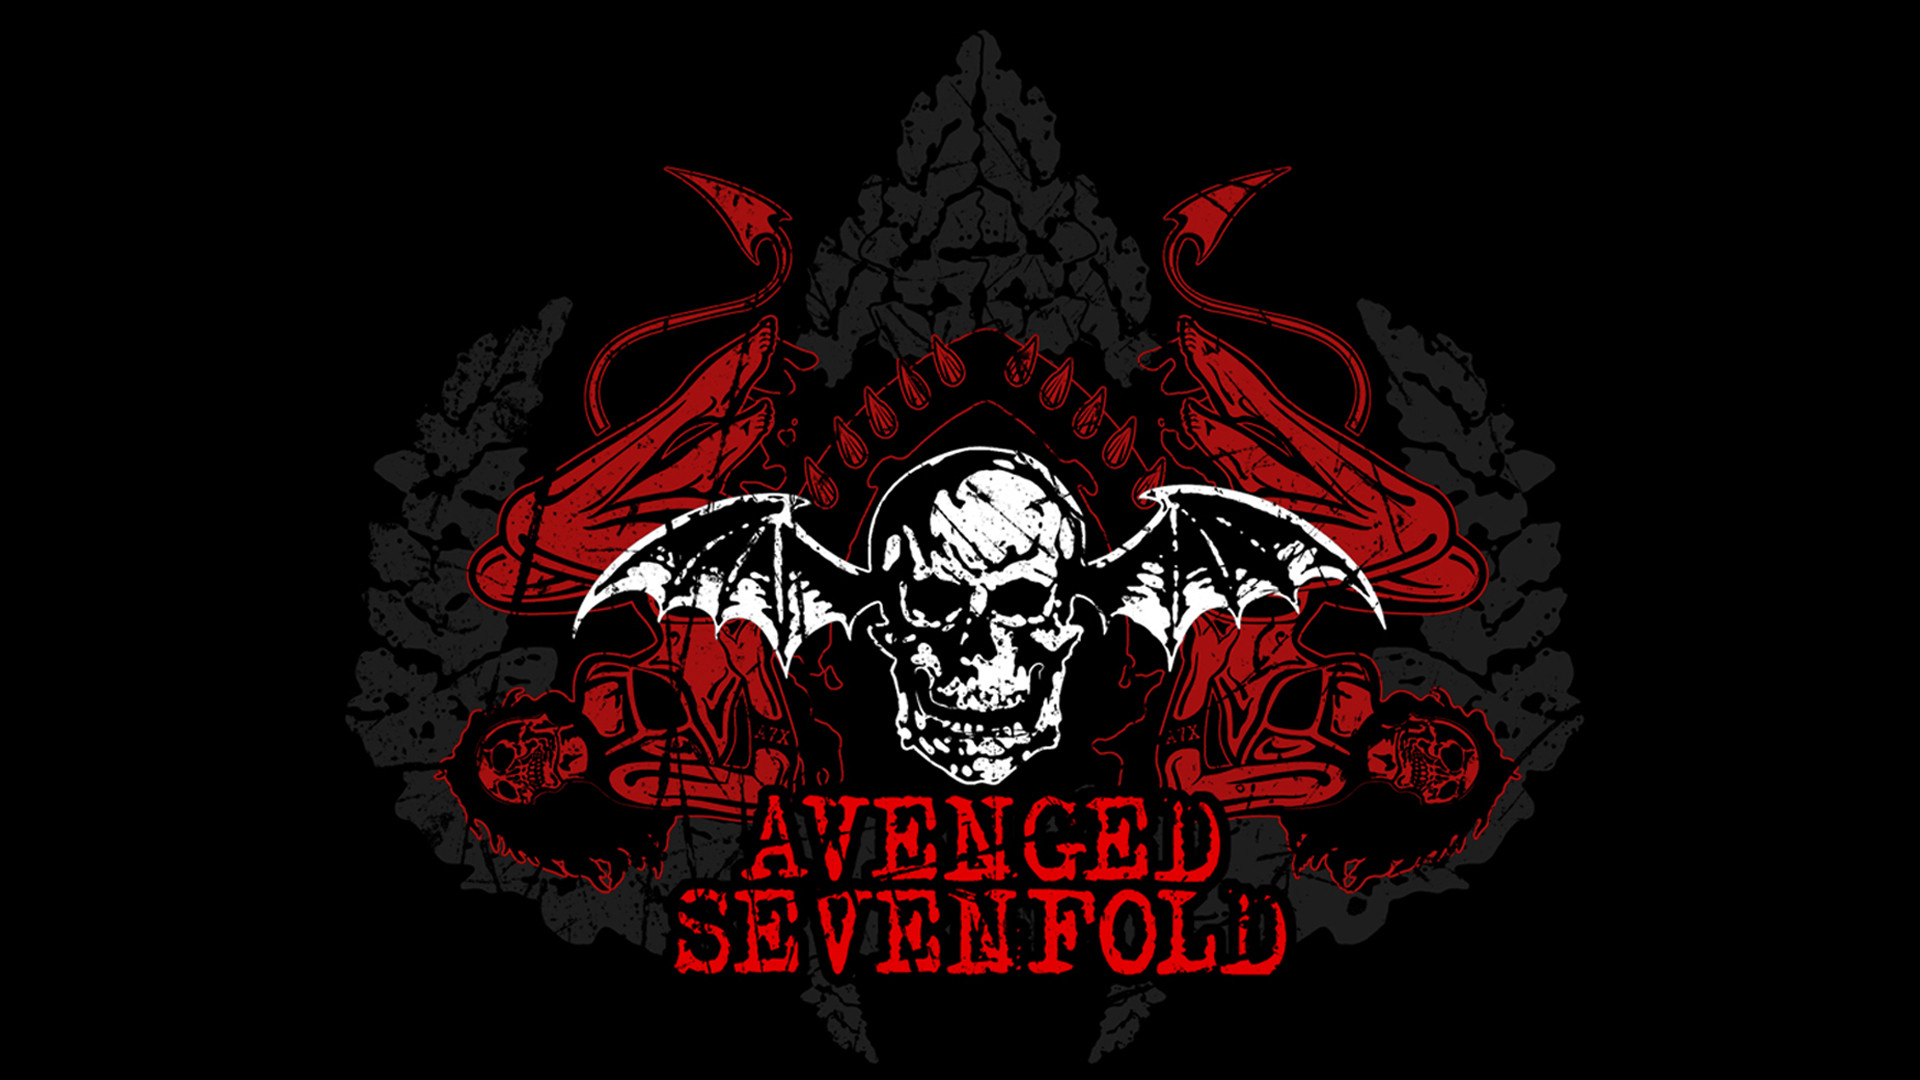 1920x1080 Related Wallpapers from Knife Party Wallpaper. Avenged Sevenfold Wallpaper